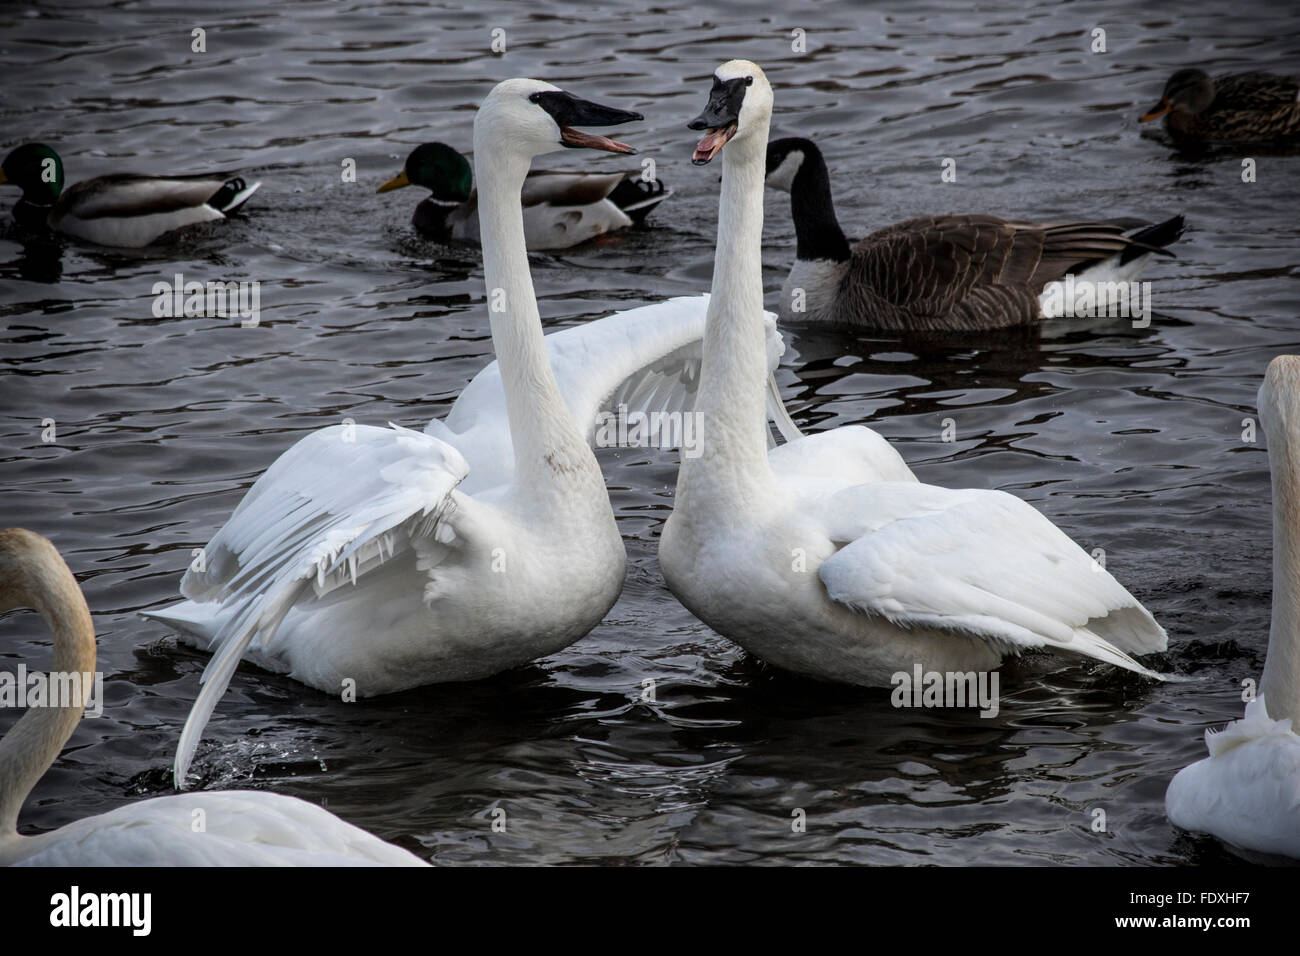 Due trumpeter Swans face off in un forte confronto Foto Stock